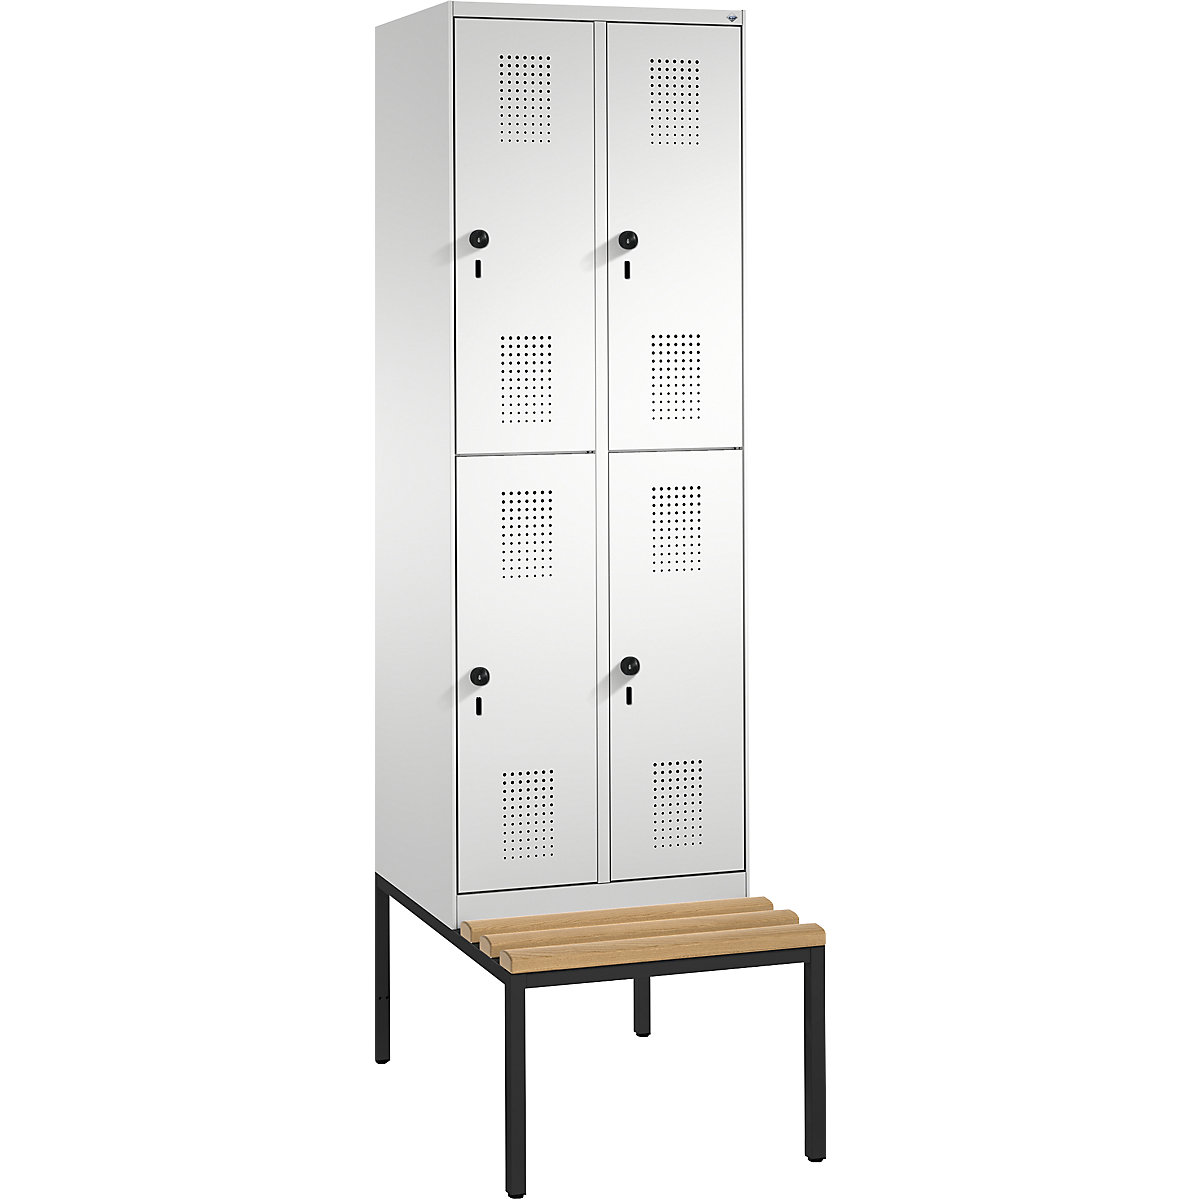 EVOLO cloakroom locker, double tier, with bench – C+P, 2 compartments, 2 shelf compartments each, compartment width 300 mm, light grey-6